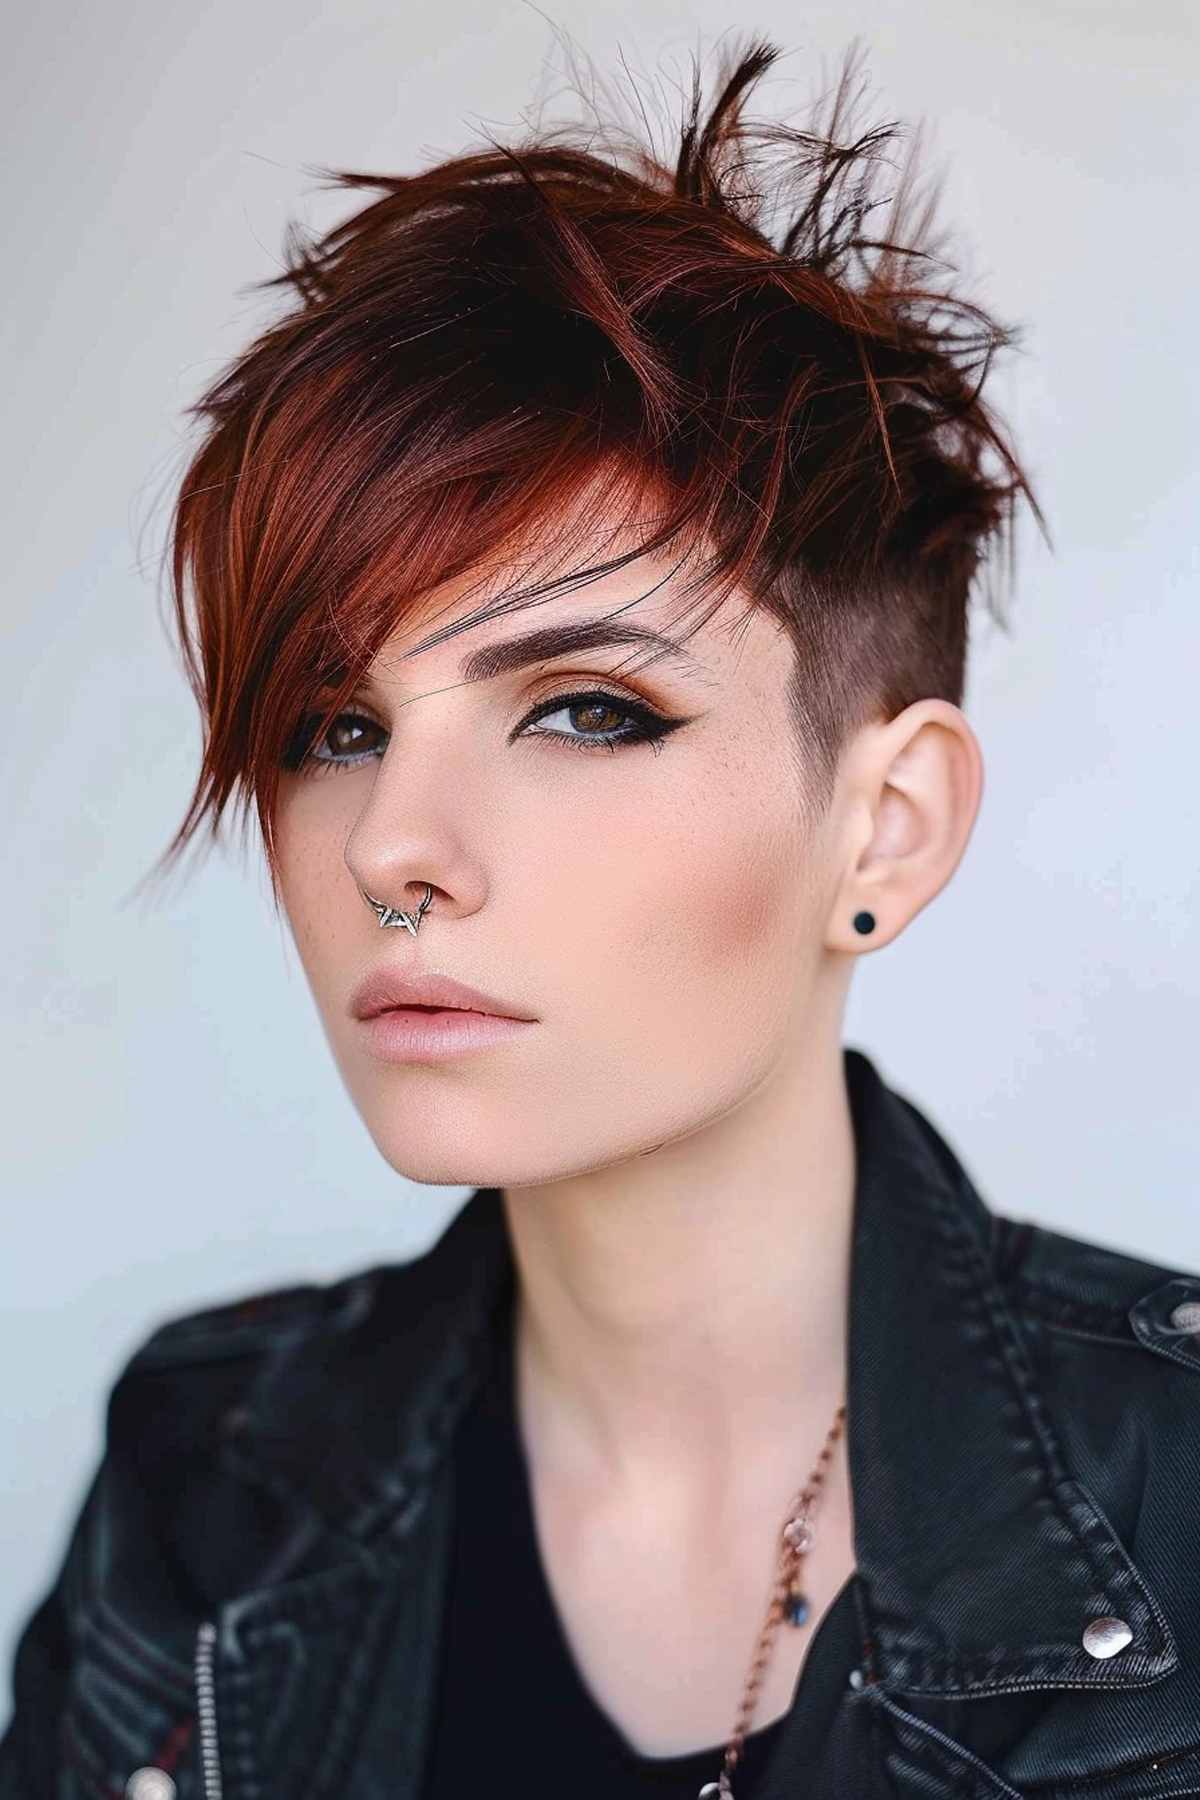 Edgy punk pixie cut with dramatic side-swept bangs in fiery red and deep brown, designed to add volume and accentuate facial features.